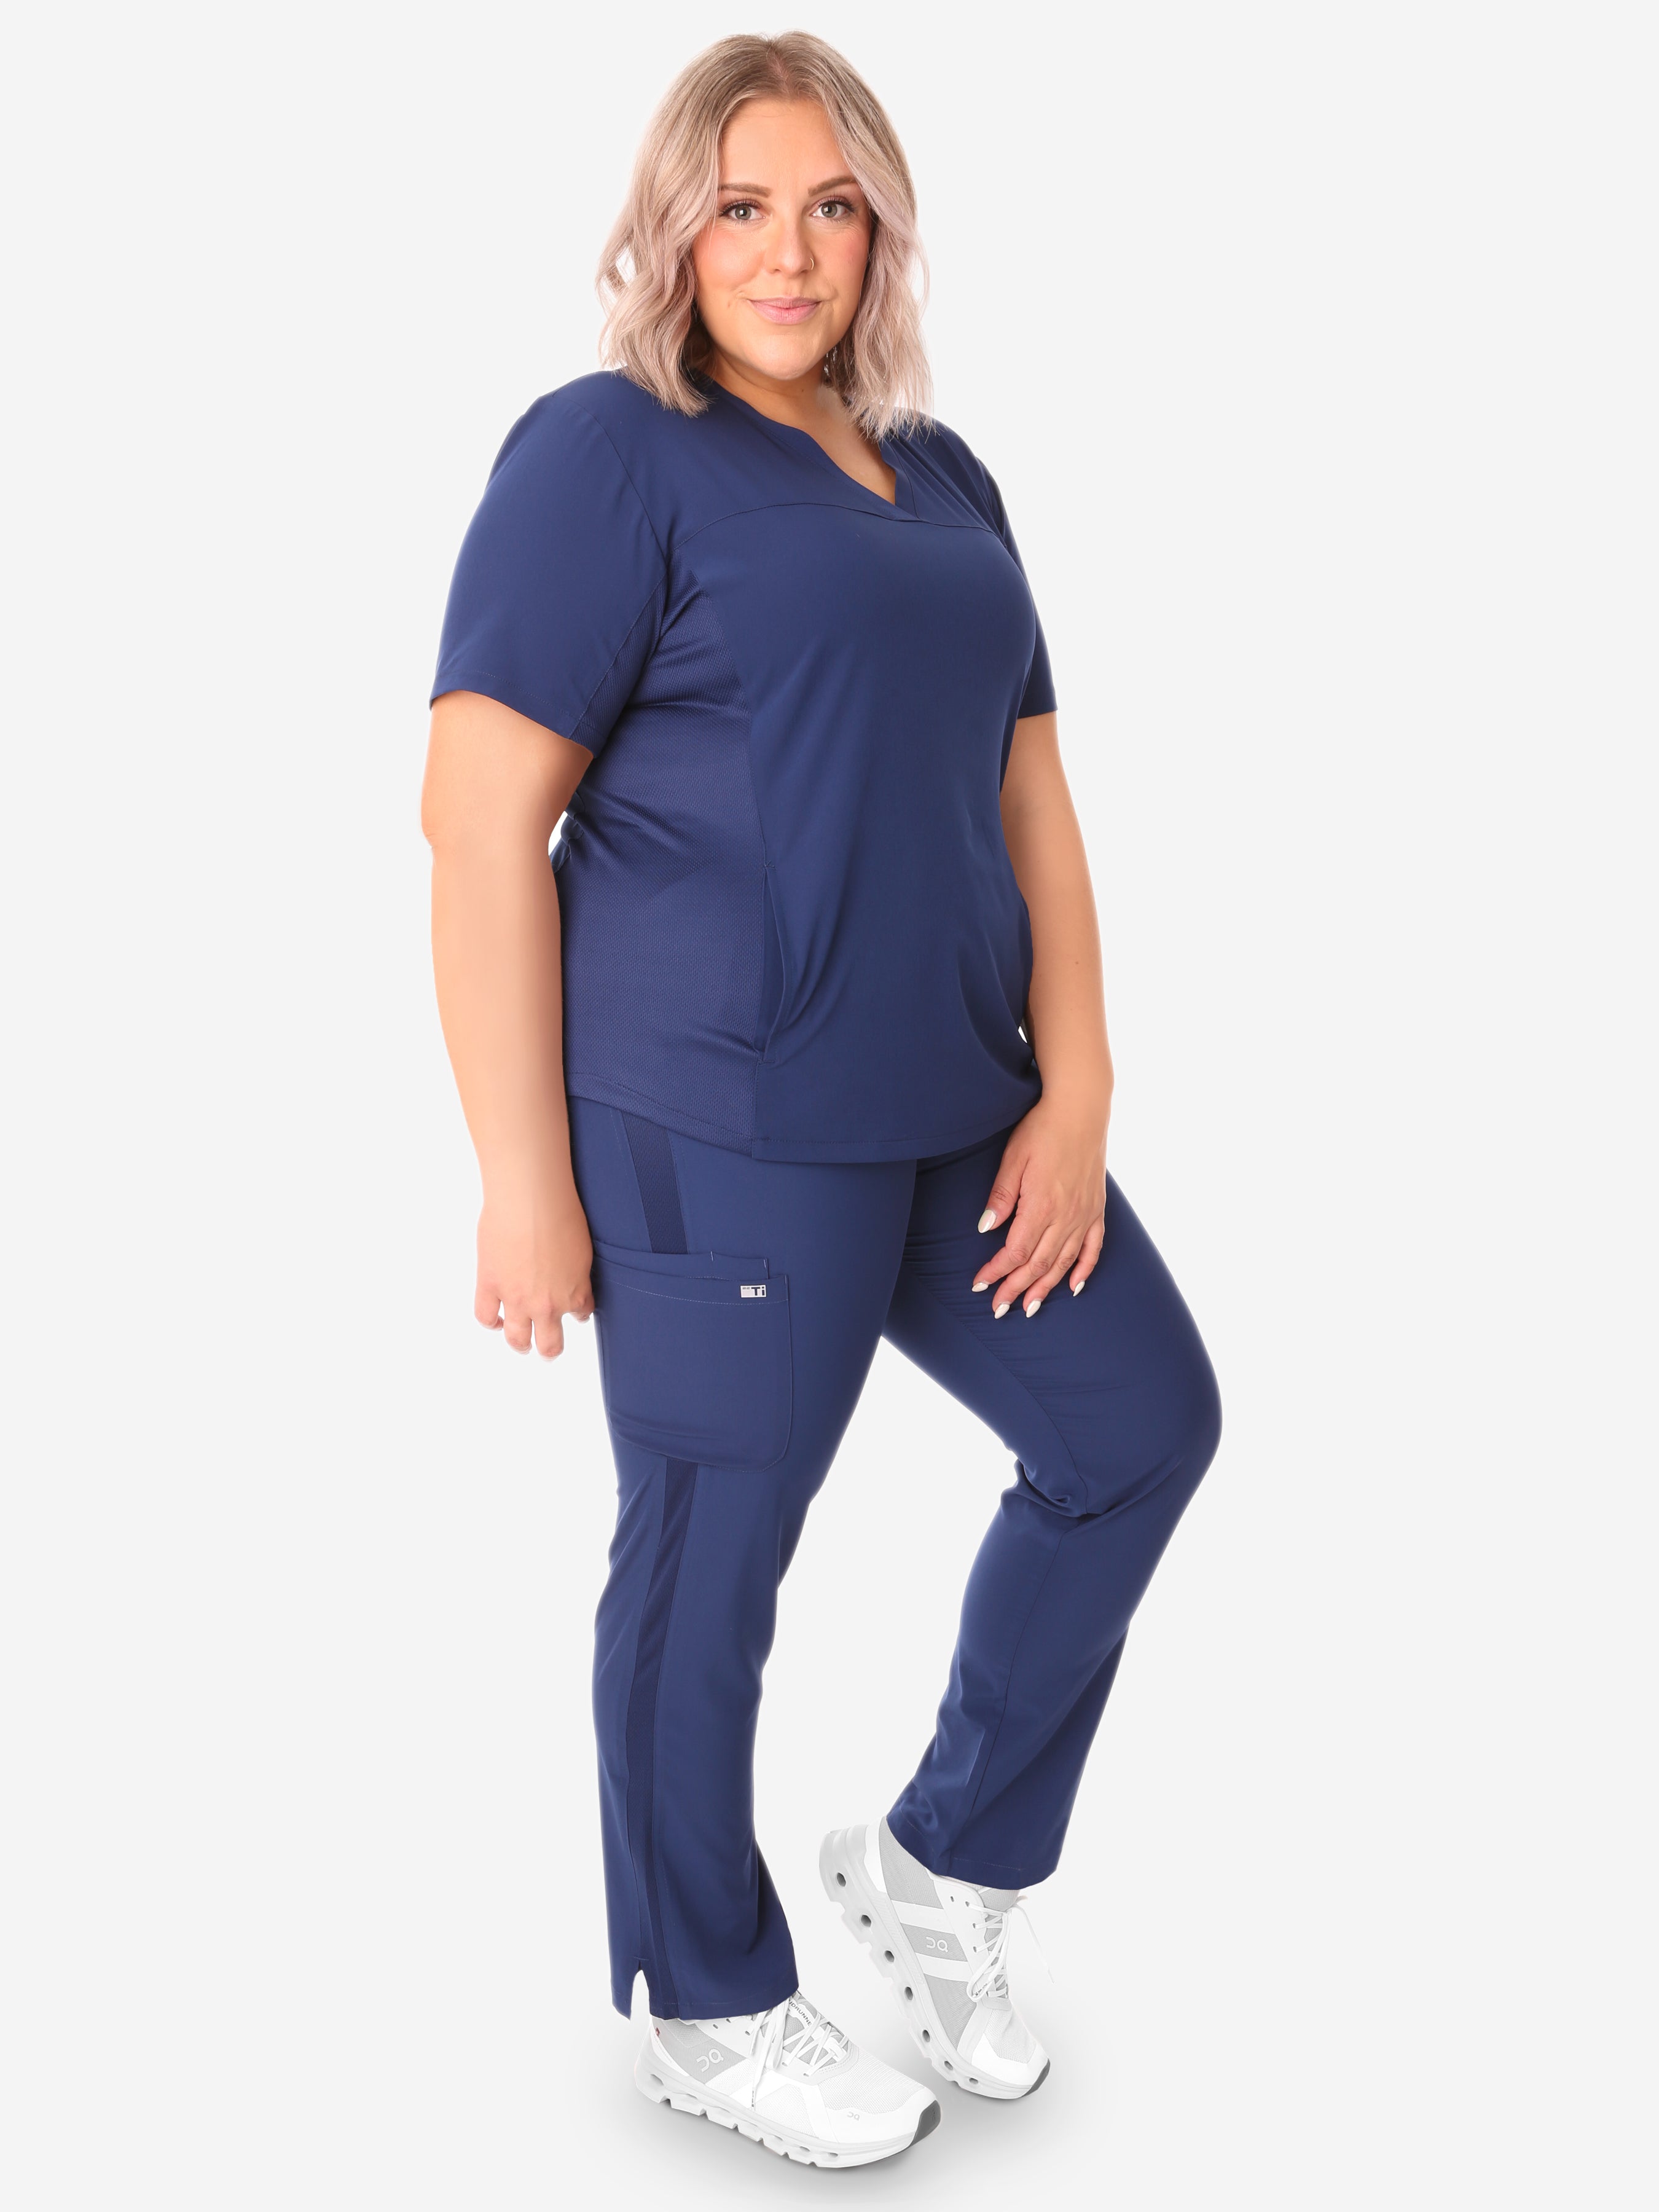 TiScrubs Navy Blue Women&#39;s Stretch 9-Pocket Pants and Stash-Pocket Top Side View Full Body